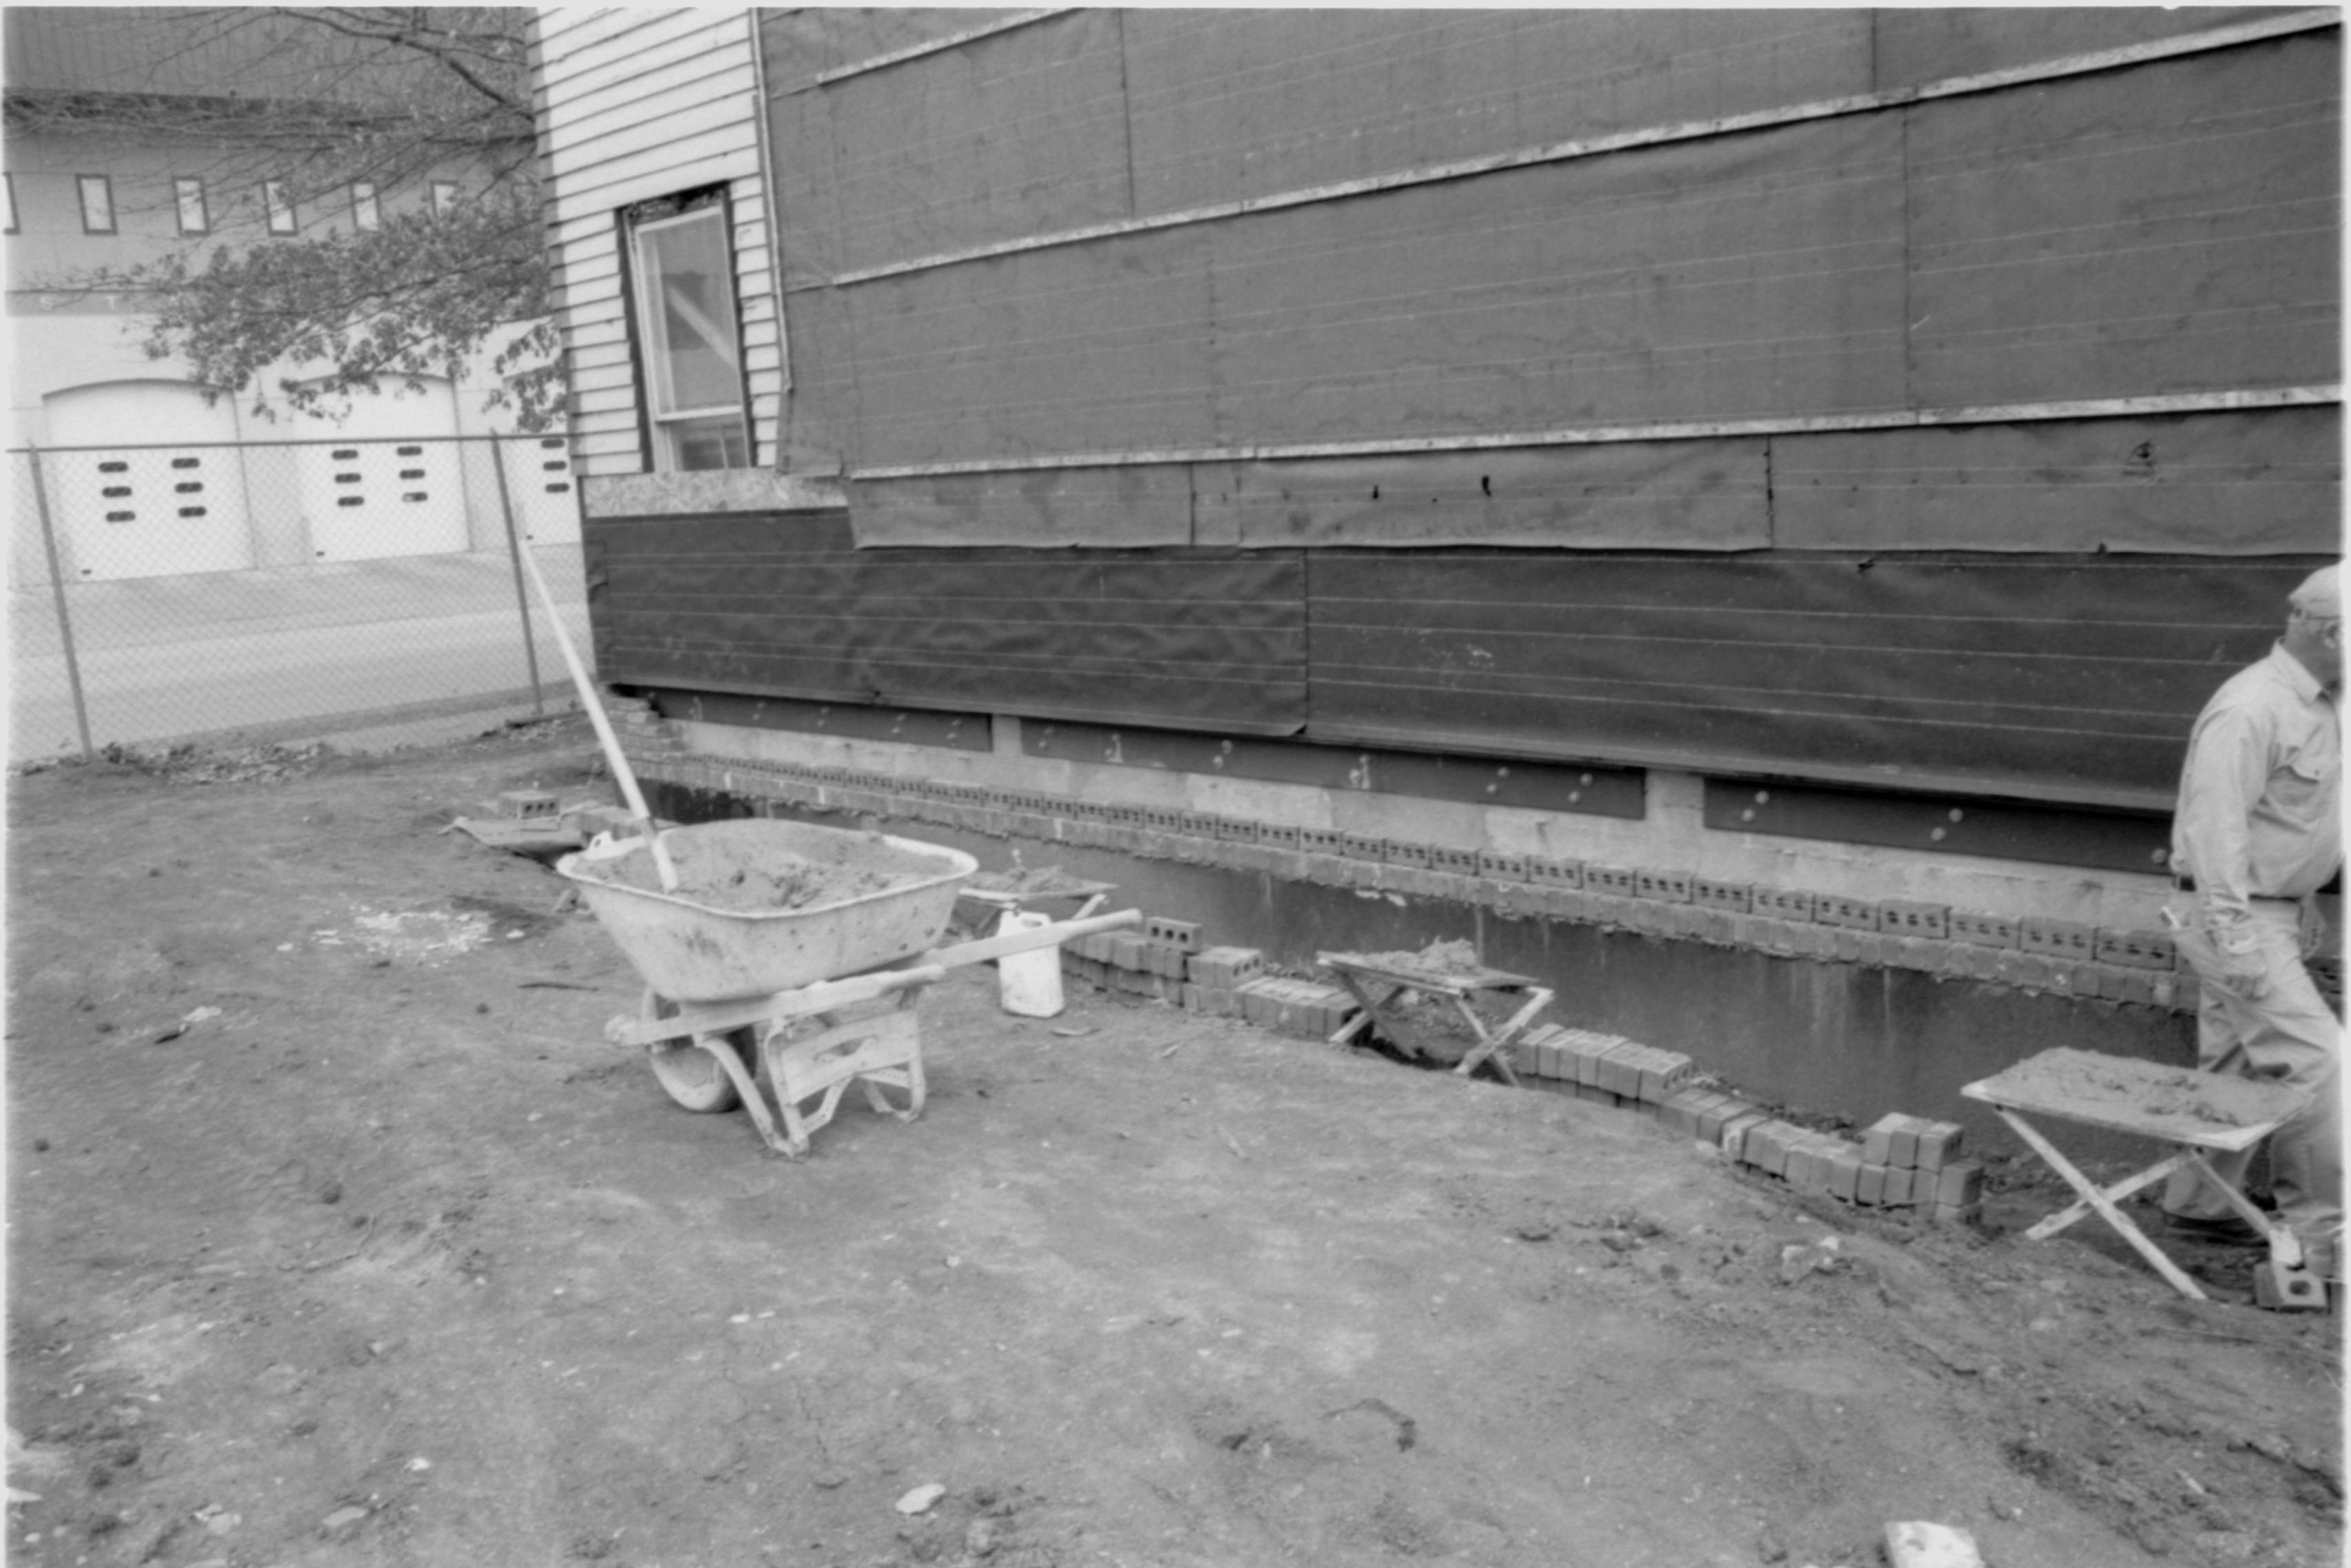 Morse - restoration, laying brick around foundation. Contract mason on right. Fire Station No. 1 in background left. Looking North/Northeast from Morse Lot (Block 10, Lots 15-16) Morse, foundation, restoration, brick, mason, Fire Station No. 1